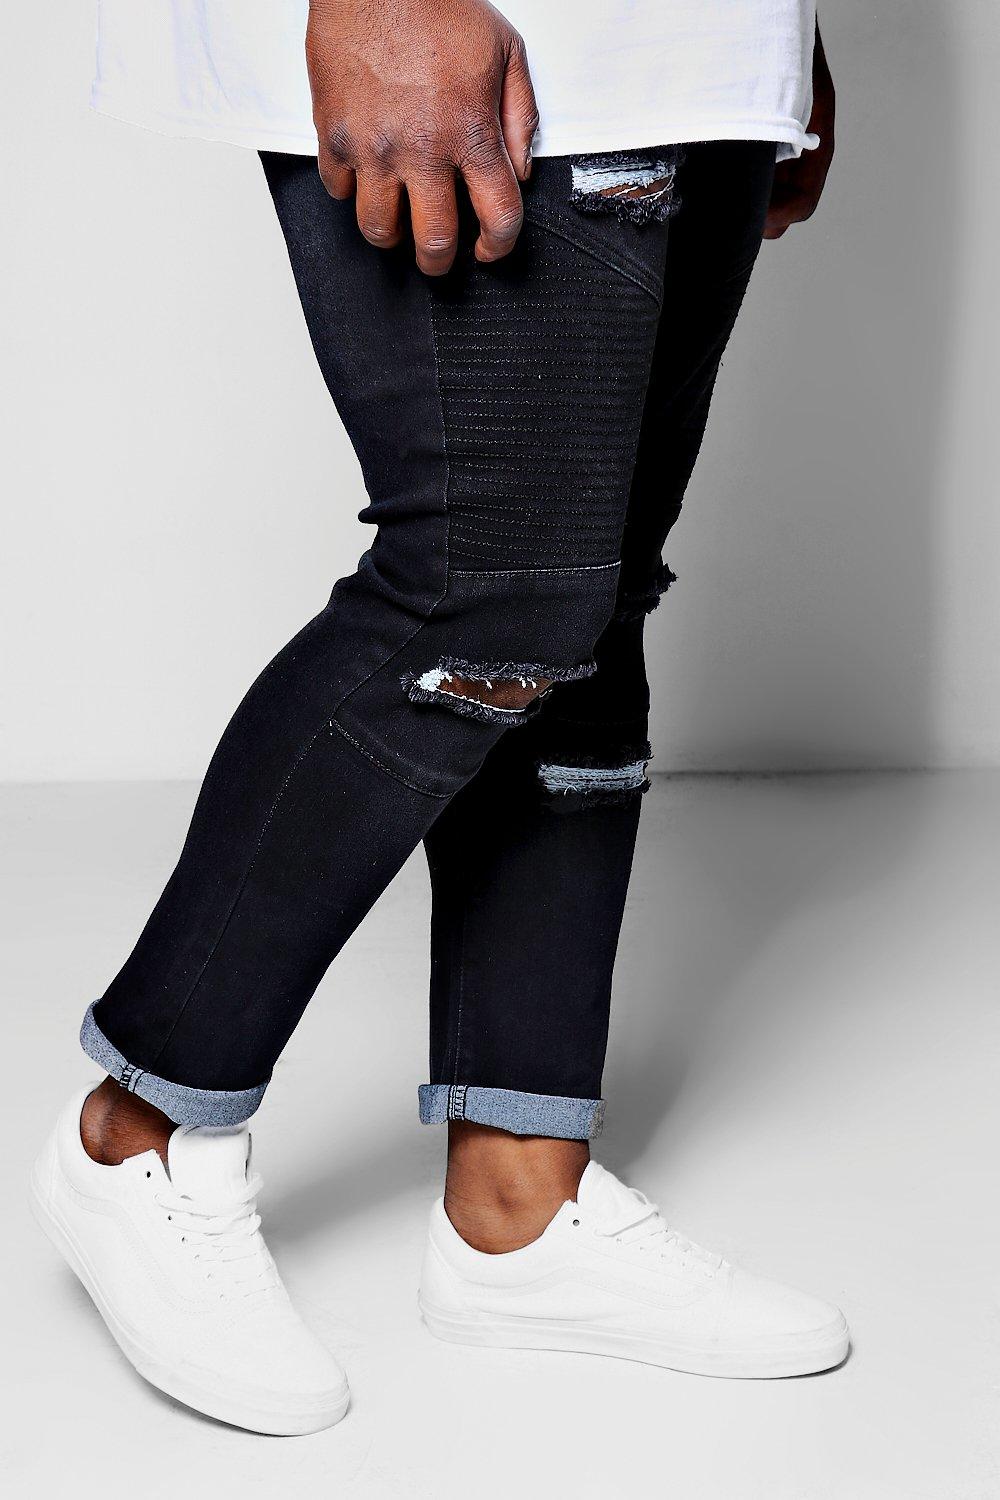 black ripped jeans mens big and tall